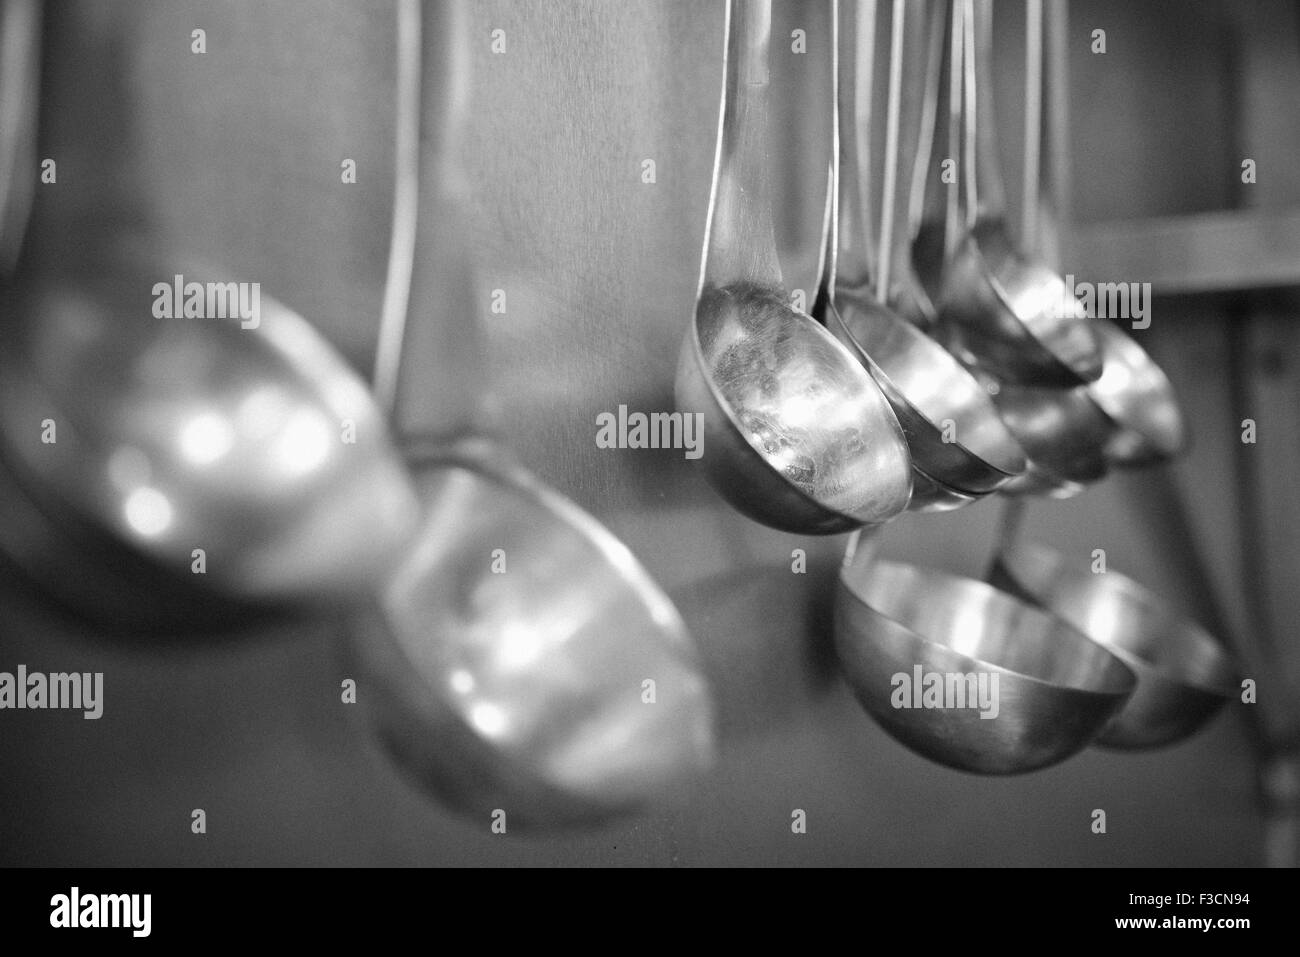 Ladles hanging in row Stock Photo